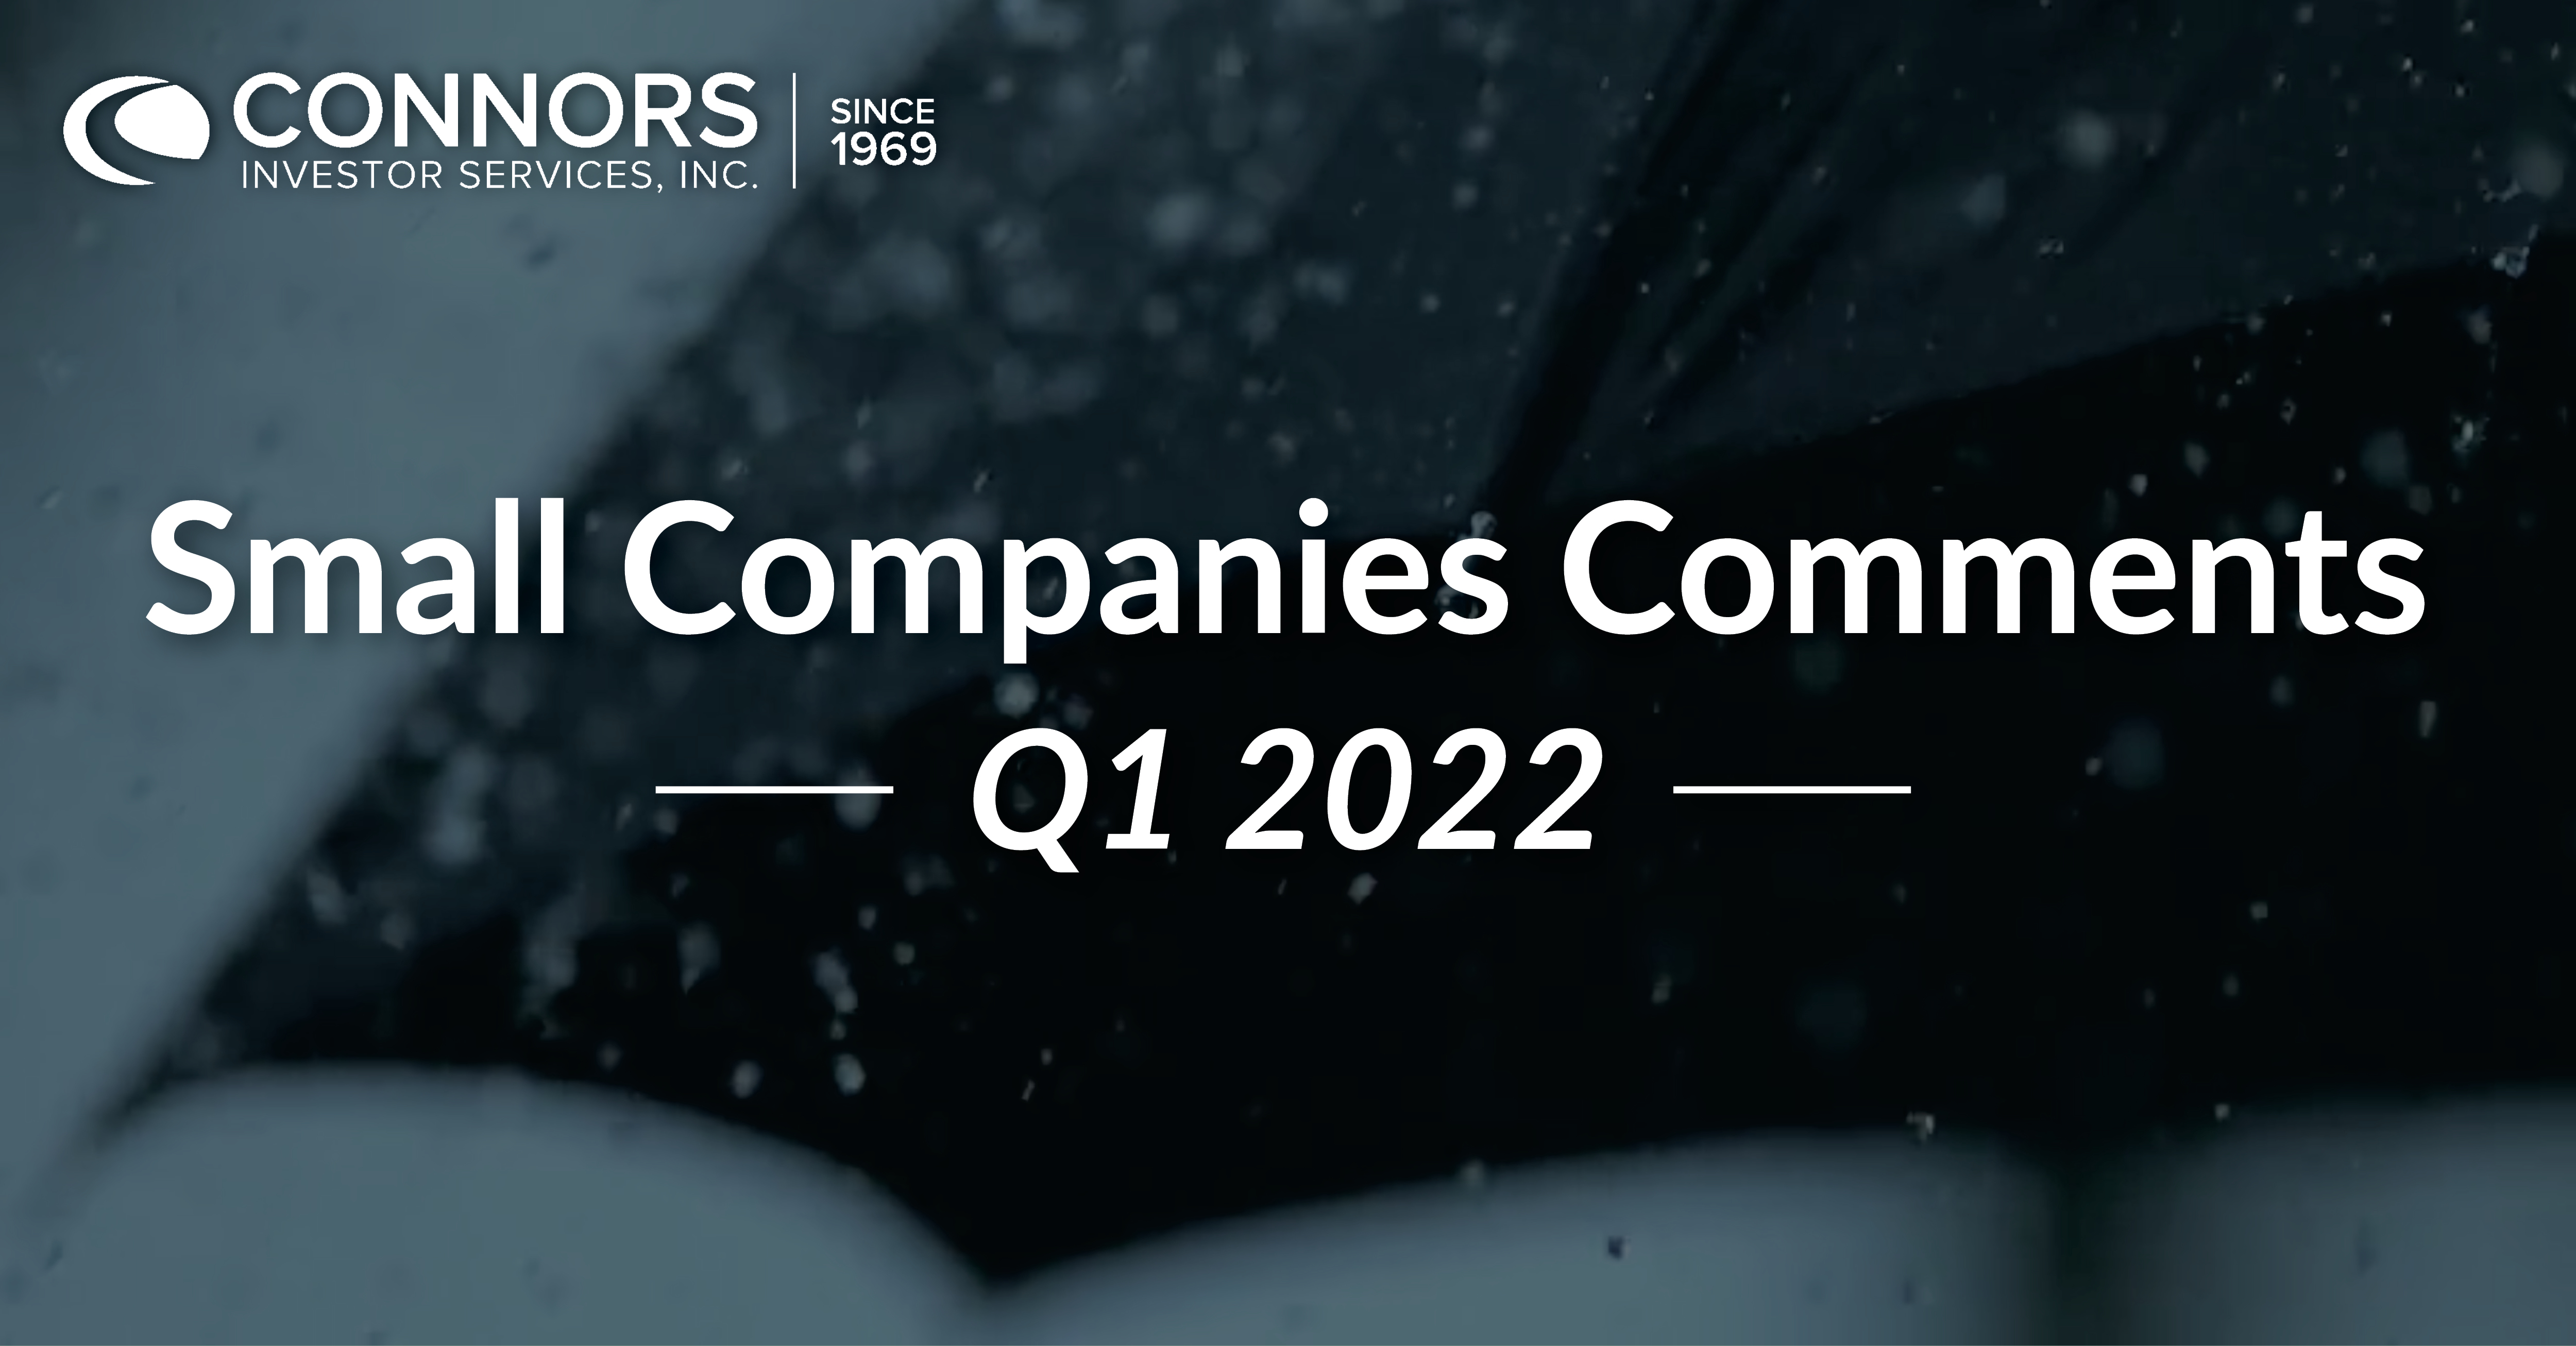 Q1 2022 Small Companies Comments